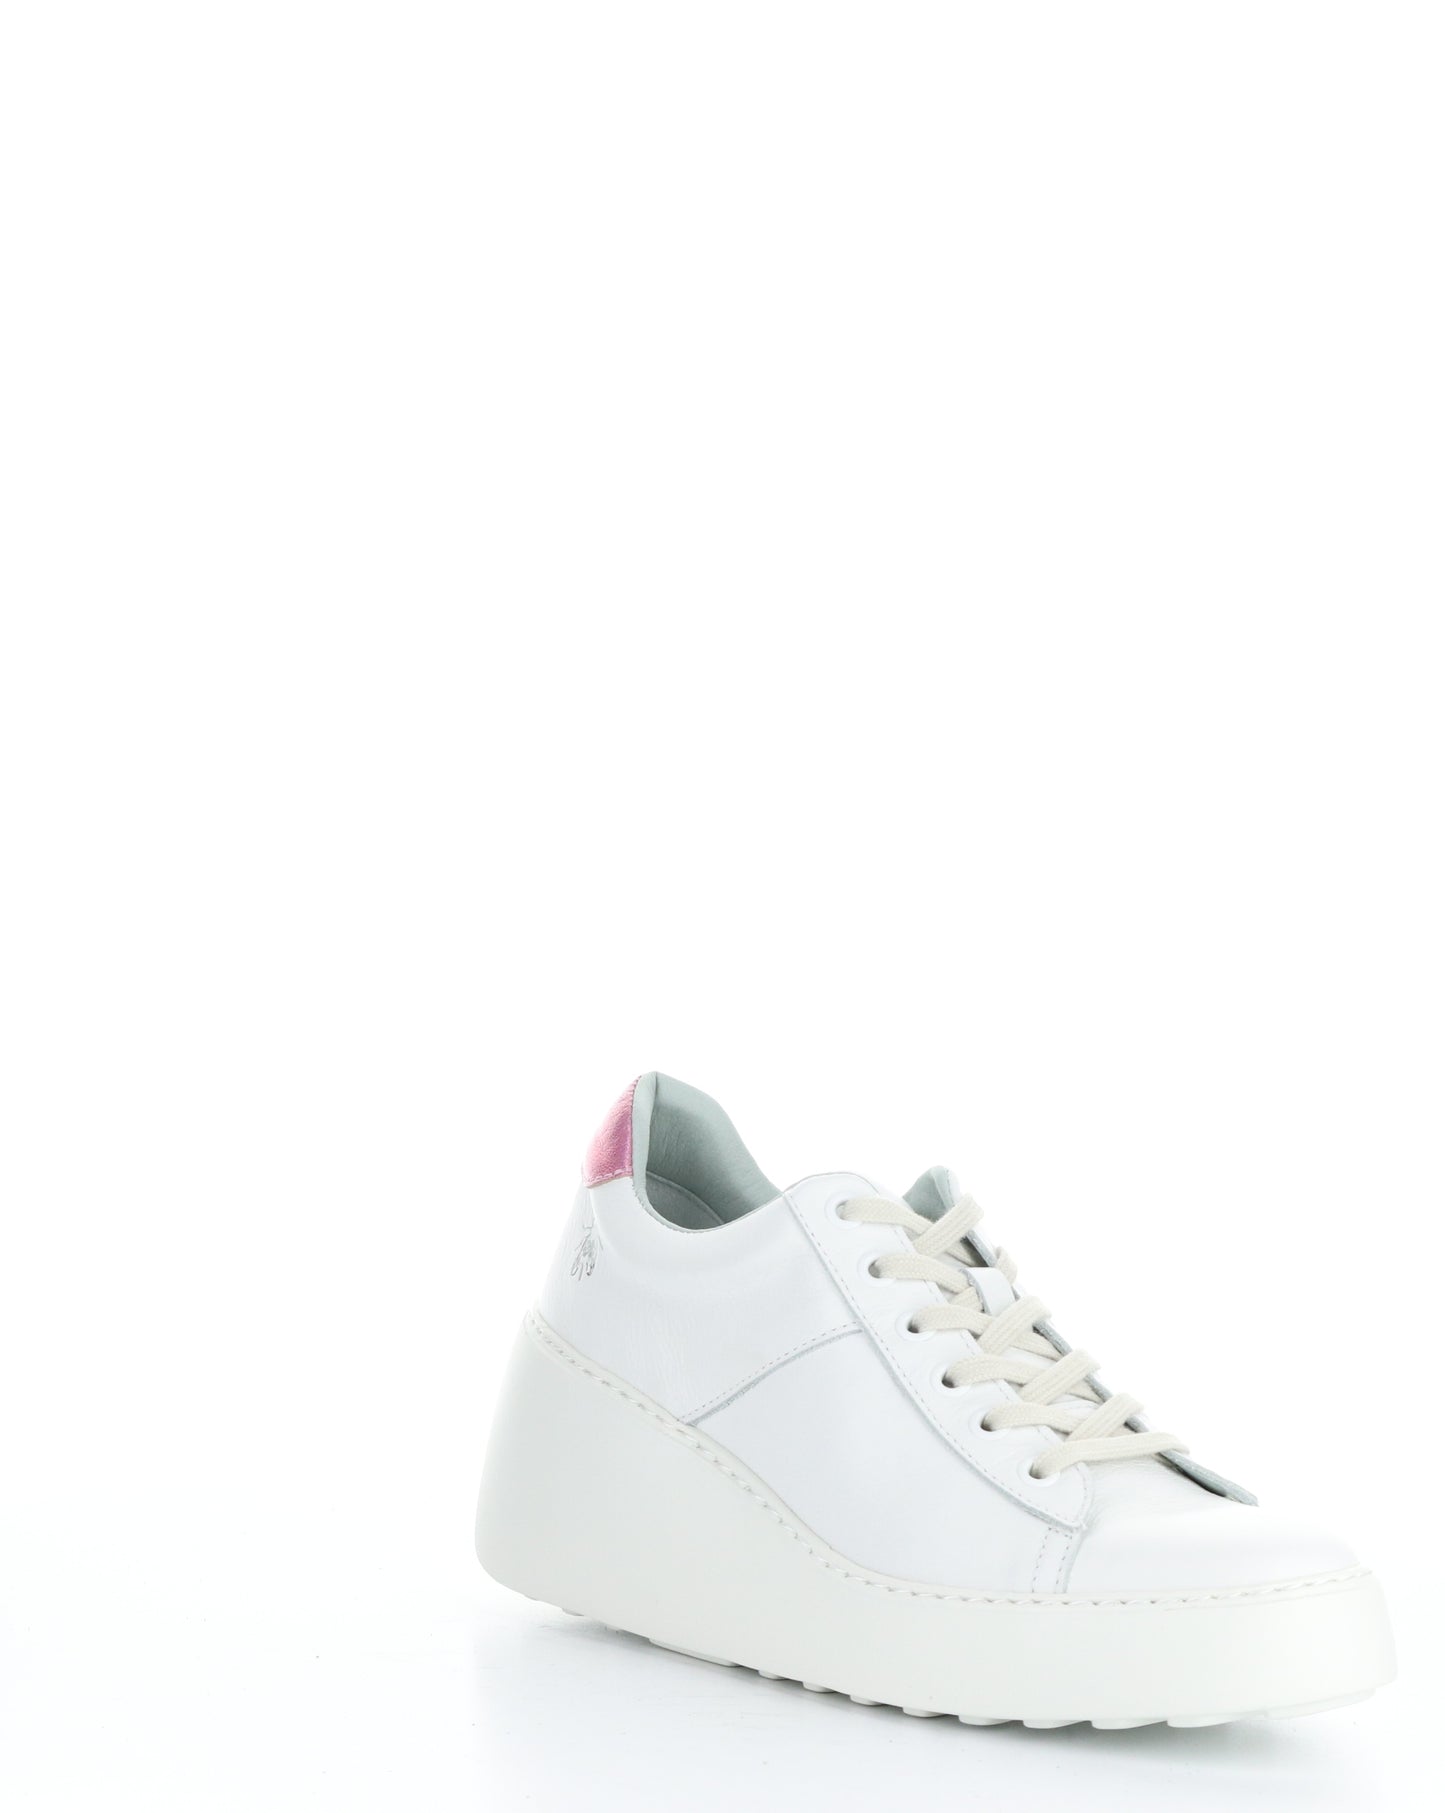 FLY Delf-290 White Pink